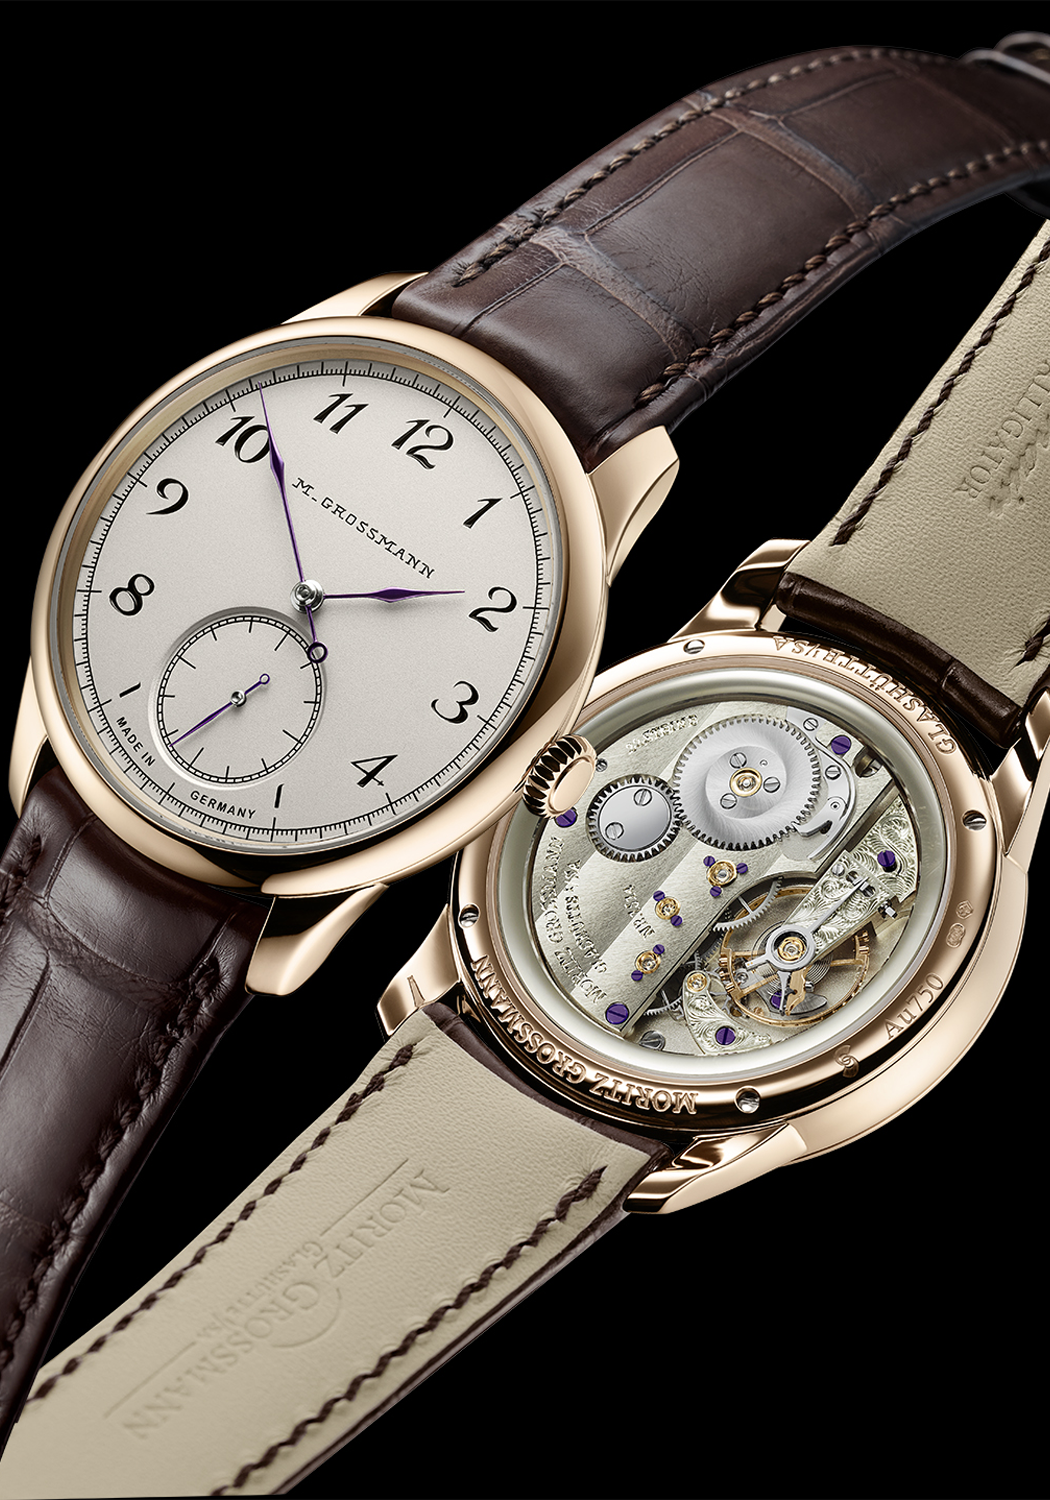 Moritz Grossmann TEFNUT Silver-Plated by Friction Rose Gold